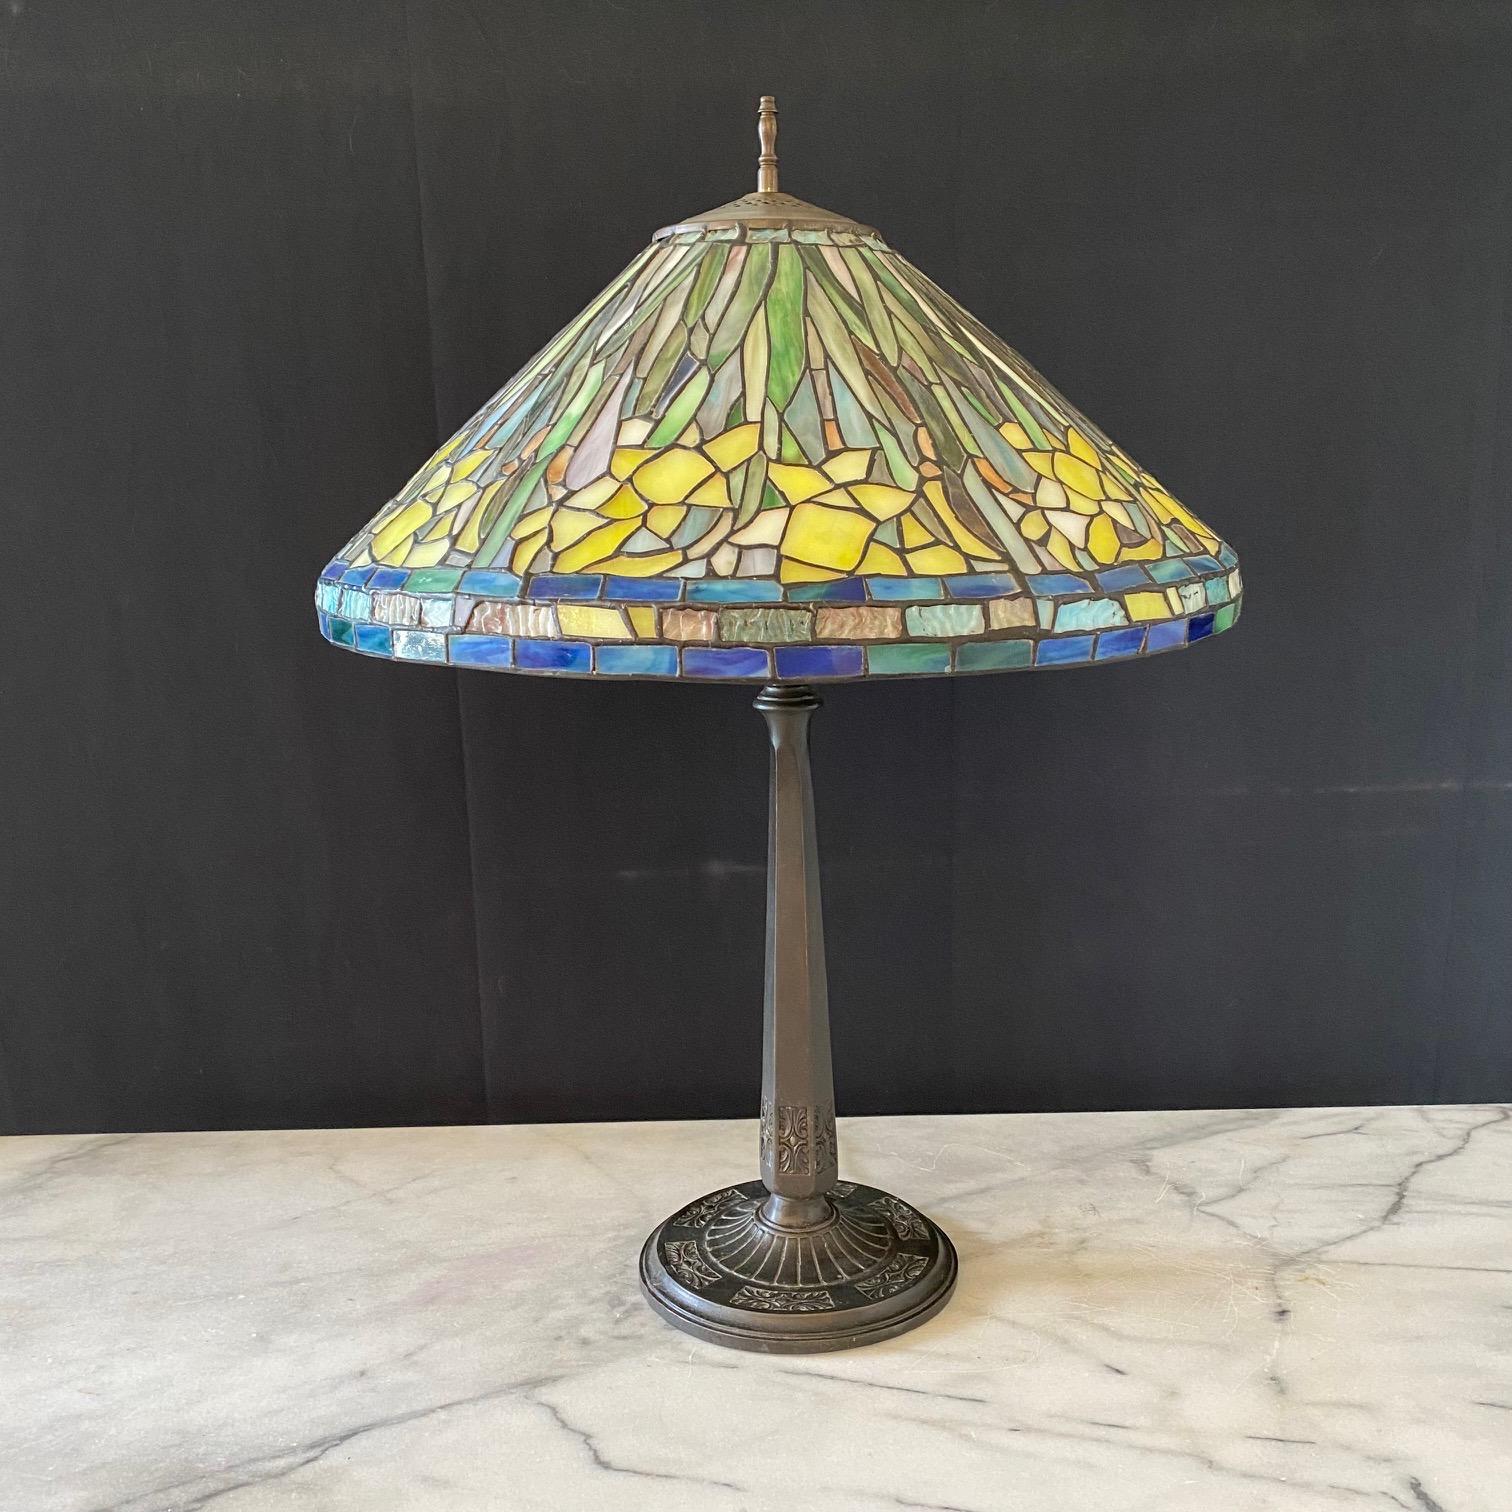  Art Nouveau Tiffany style lamp with multi colored floral patterned glass lampshade typical of the Art Nouveau and Art Deco style having leaded glass pieces in shades of yellow, orange and green with blue trim,  arranged to portray irises in full